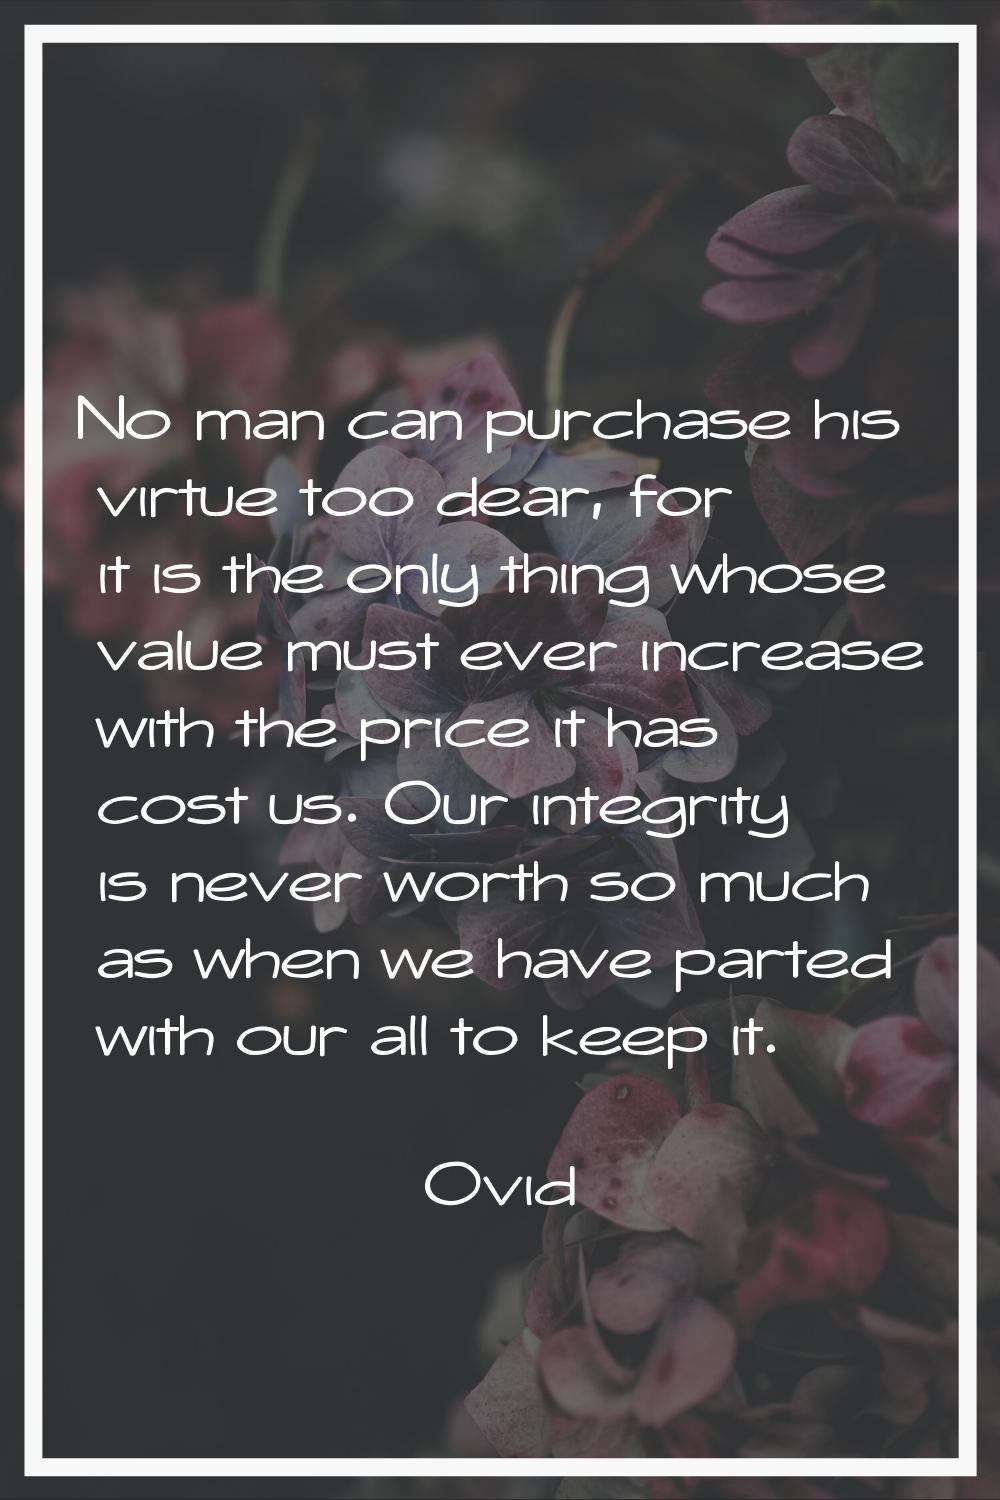 No man can purchase his virtue too dear, for it is the only thing whose value must ever increase wi